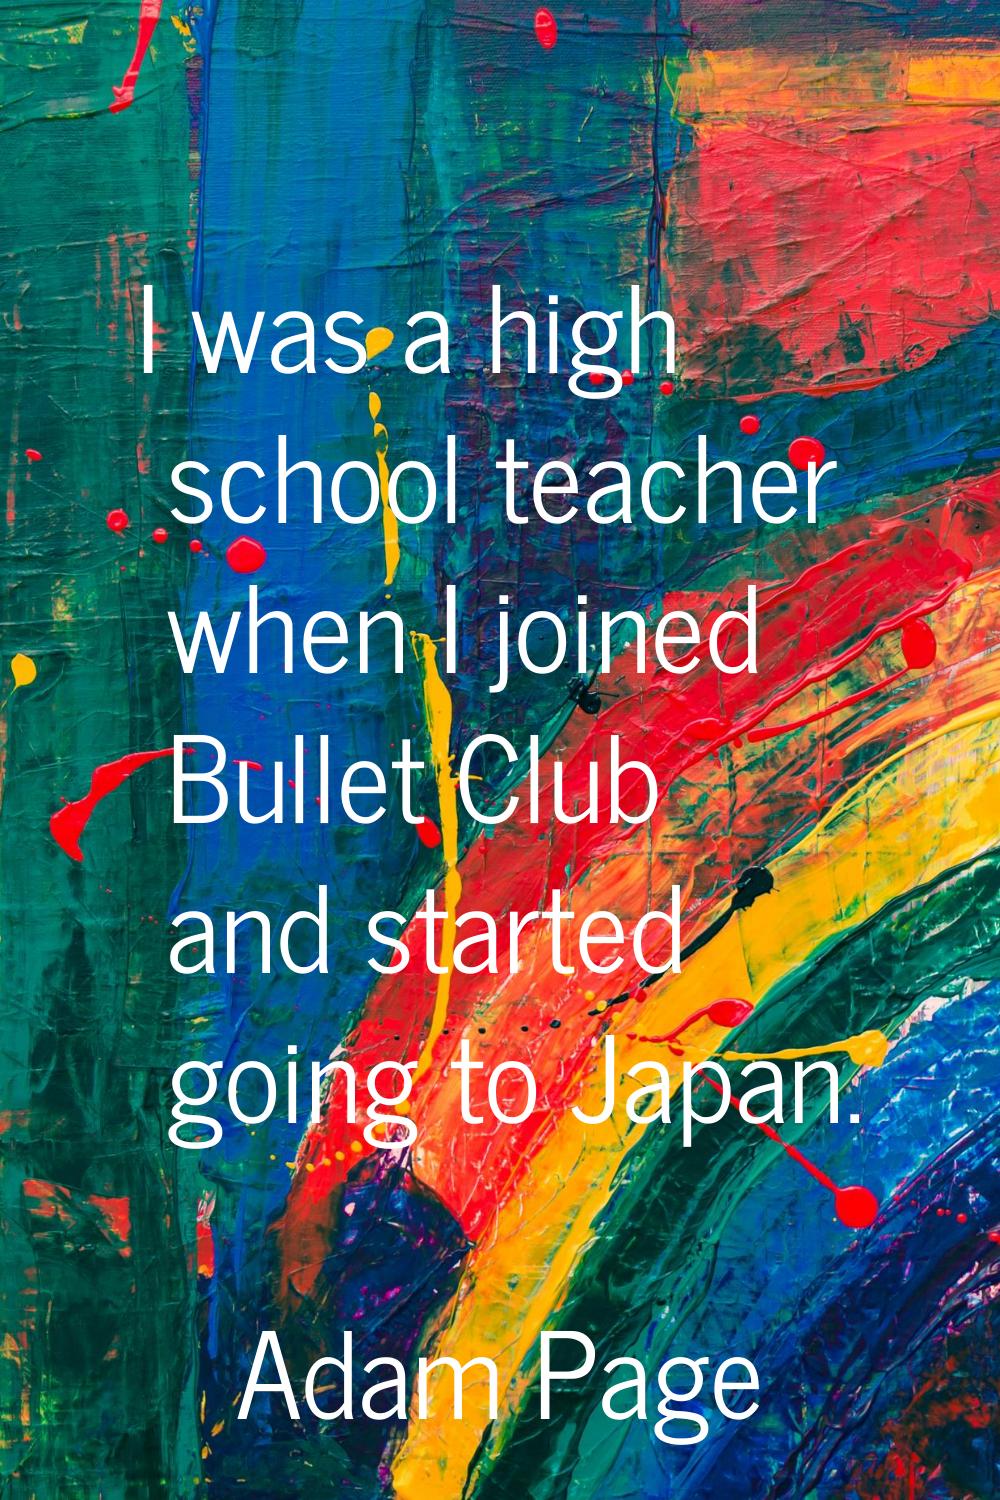 I was a high school teacher when I joined Bullet Club and started going to Japan.